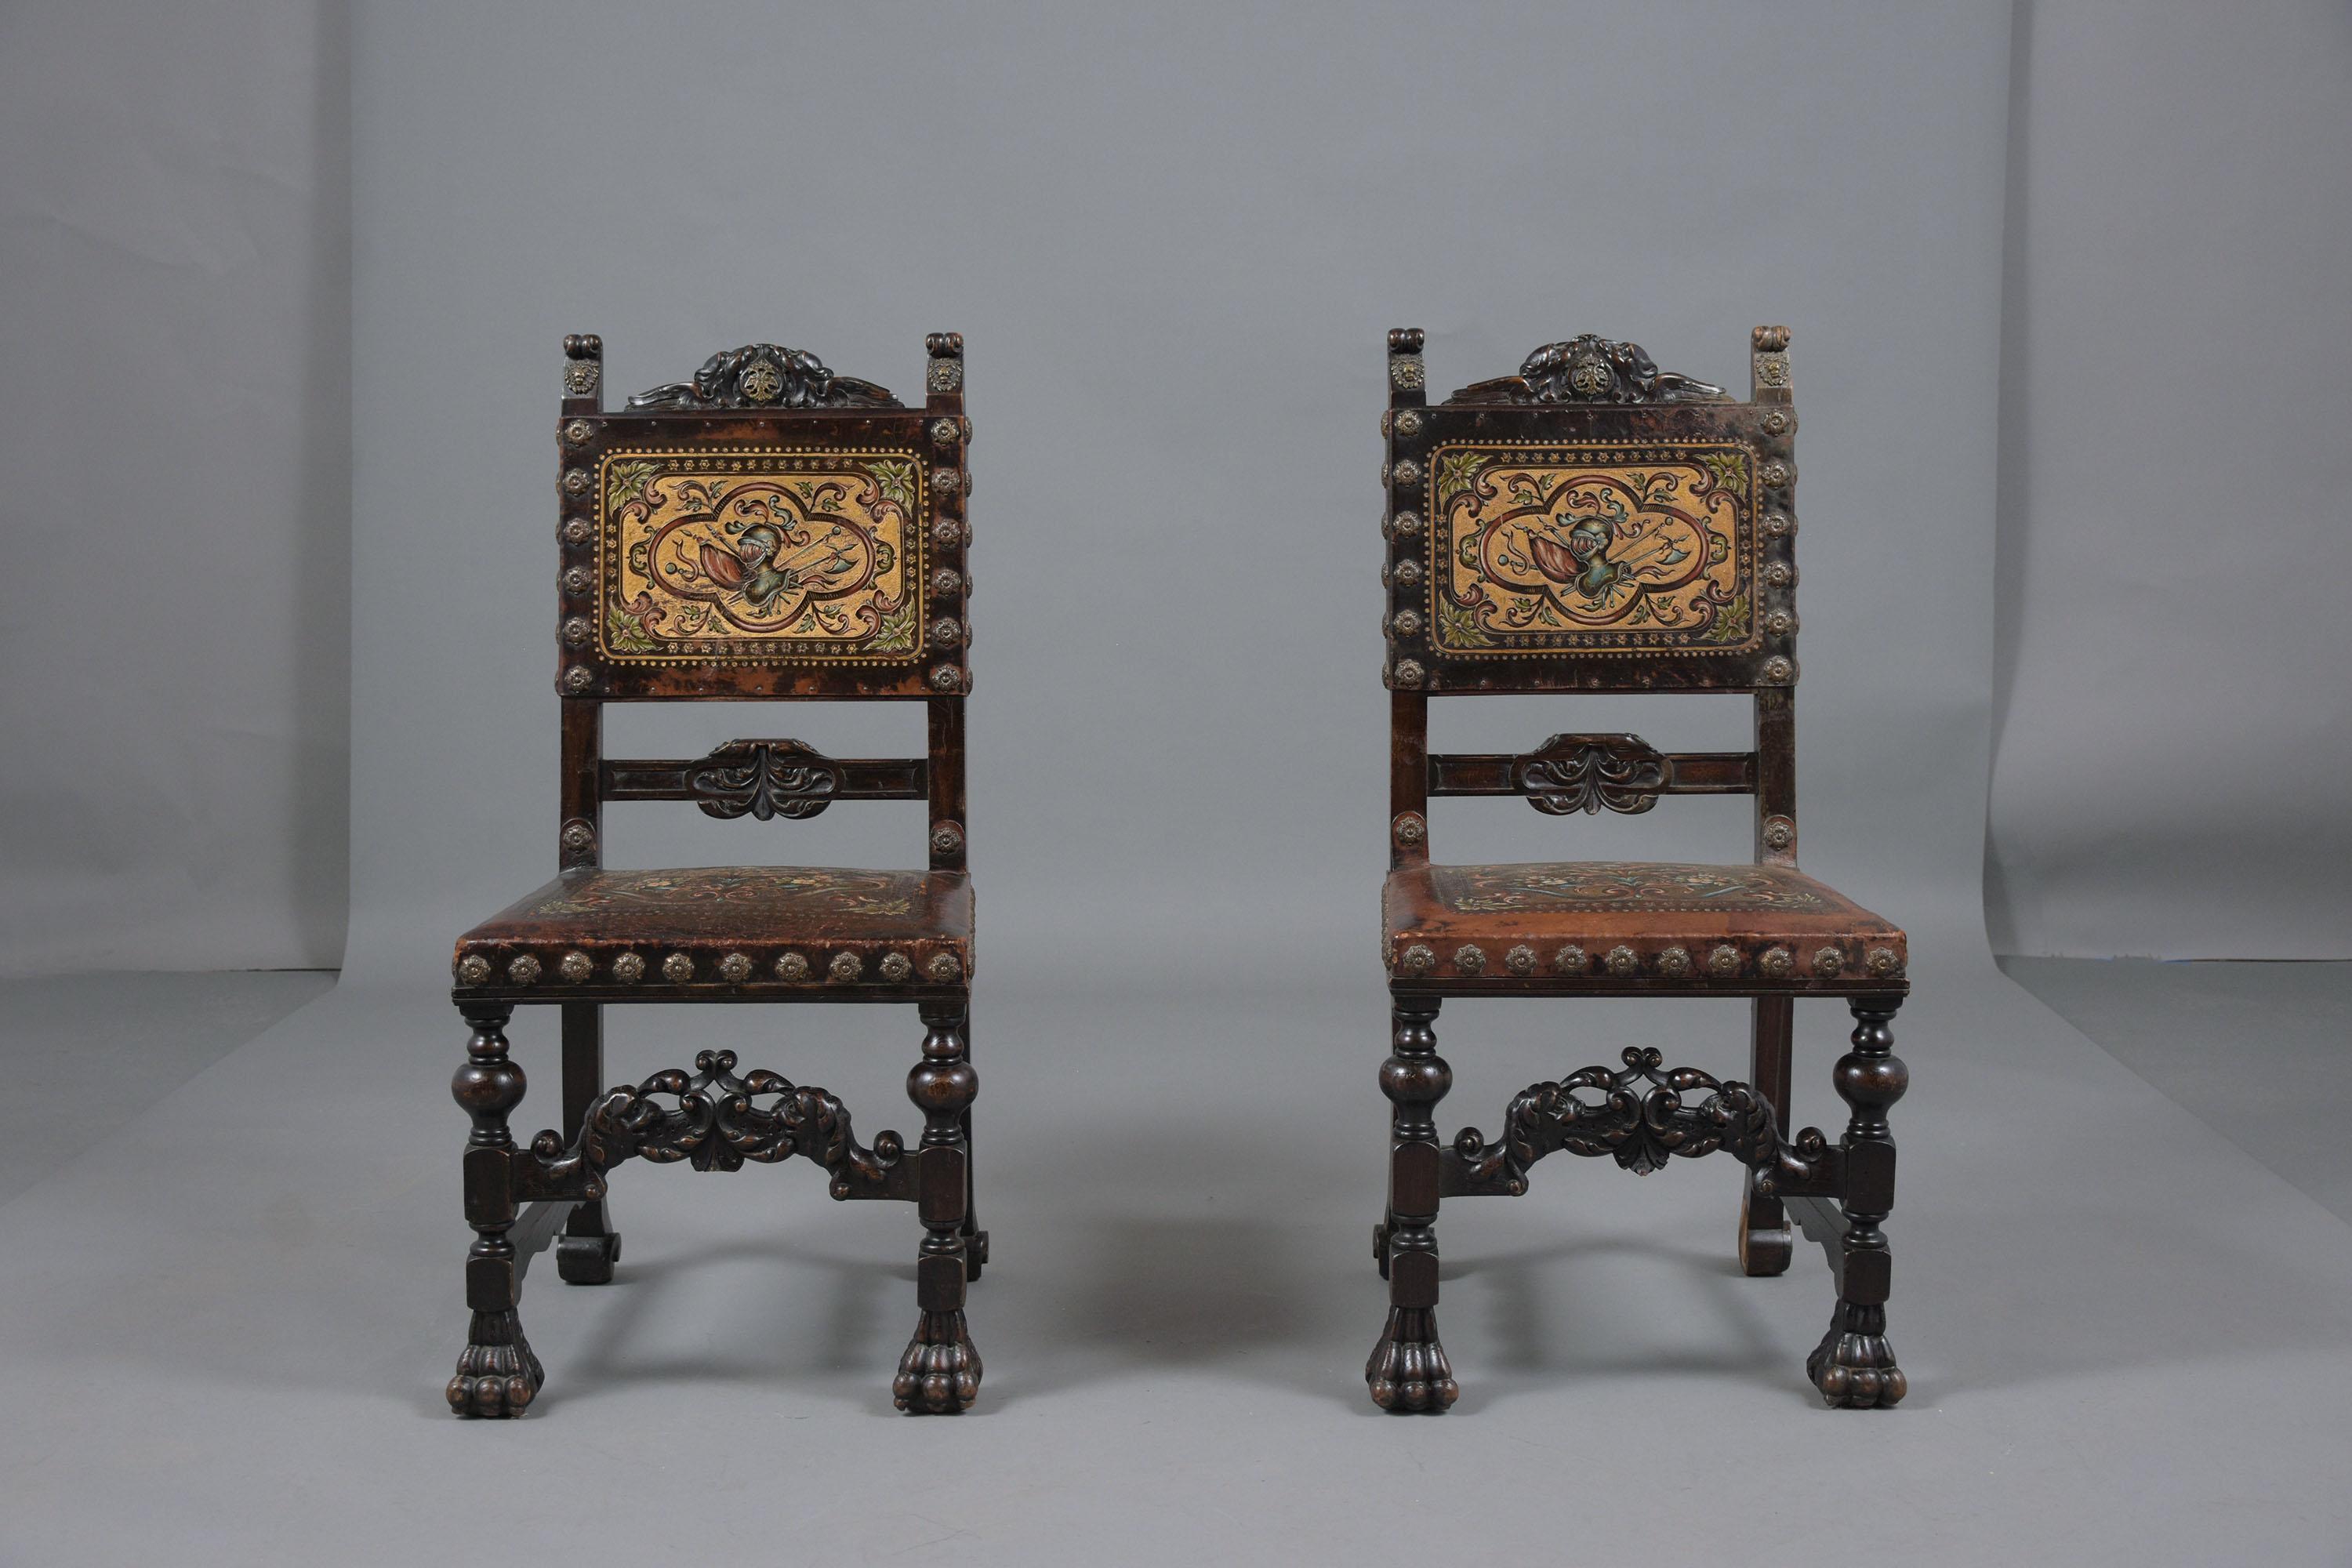 A pair of antique baroque chairs hand-crafted out of walnut wood in a good condition and has been restored by our team of expert craftsmen. This set of dining chairs features a dark walnut color with a beautiful patina finish, hand-carved details